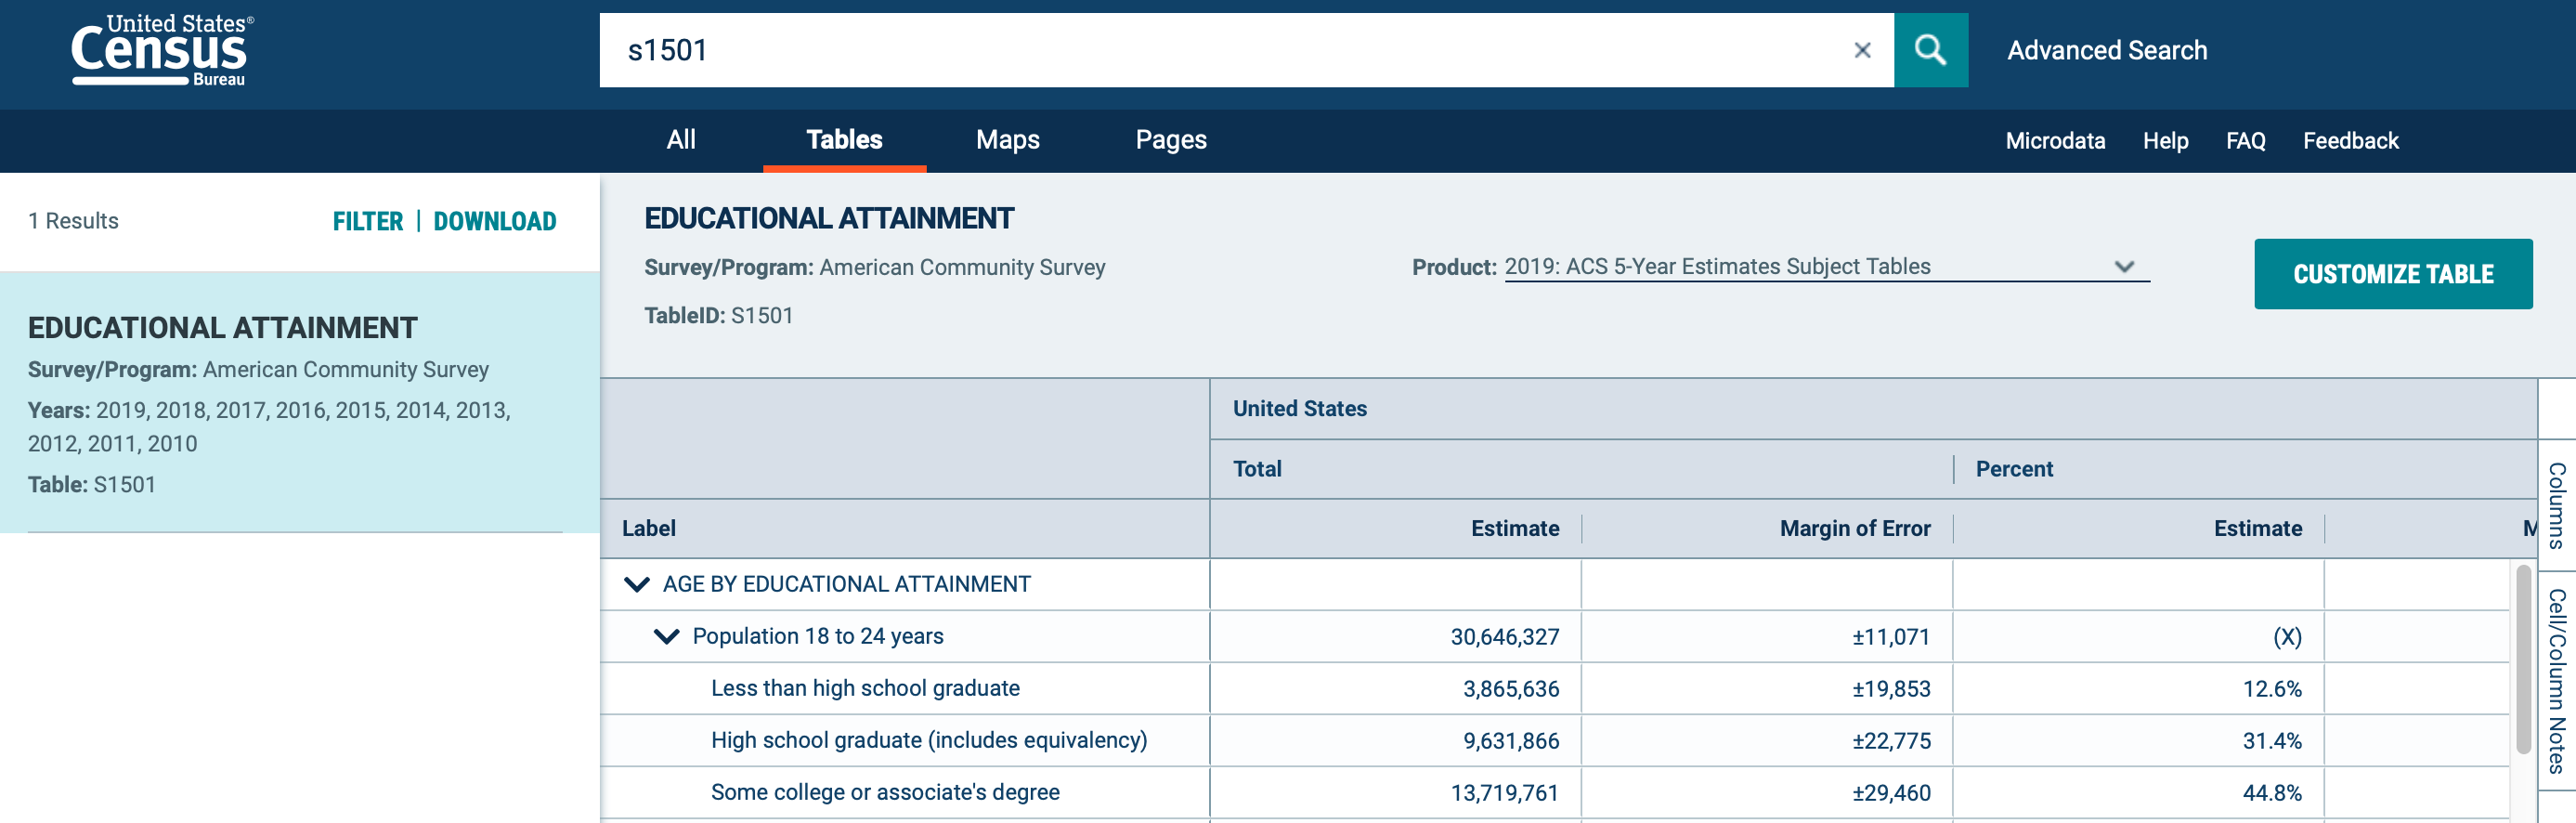 Screenshot of the Explore Census Data portal after searching for table S1501 and selecting the 2019 ACS 5-Year Estimates product